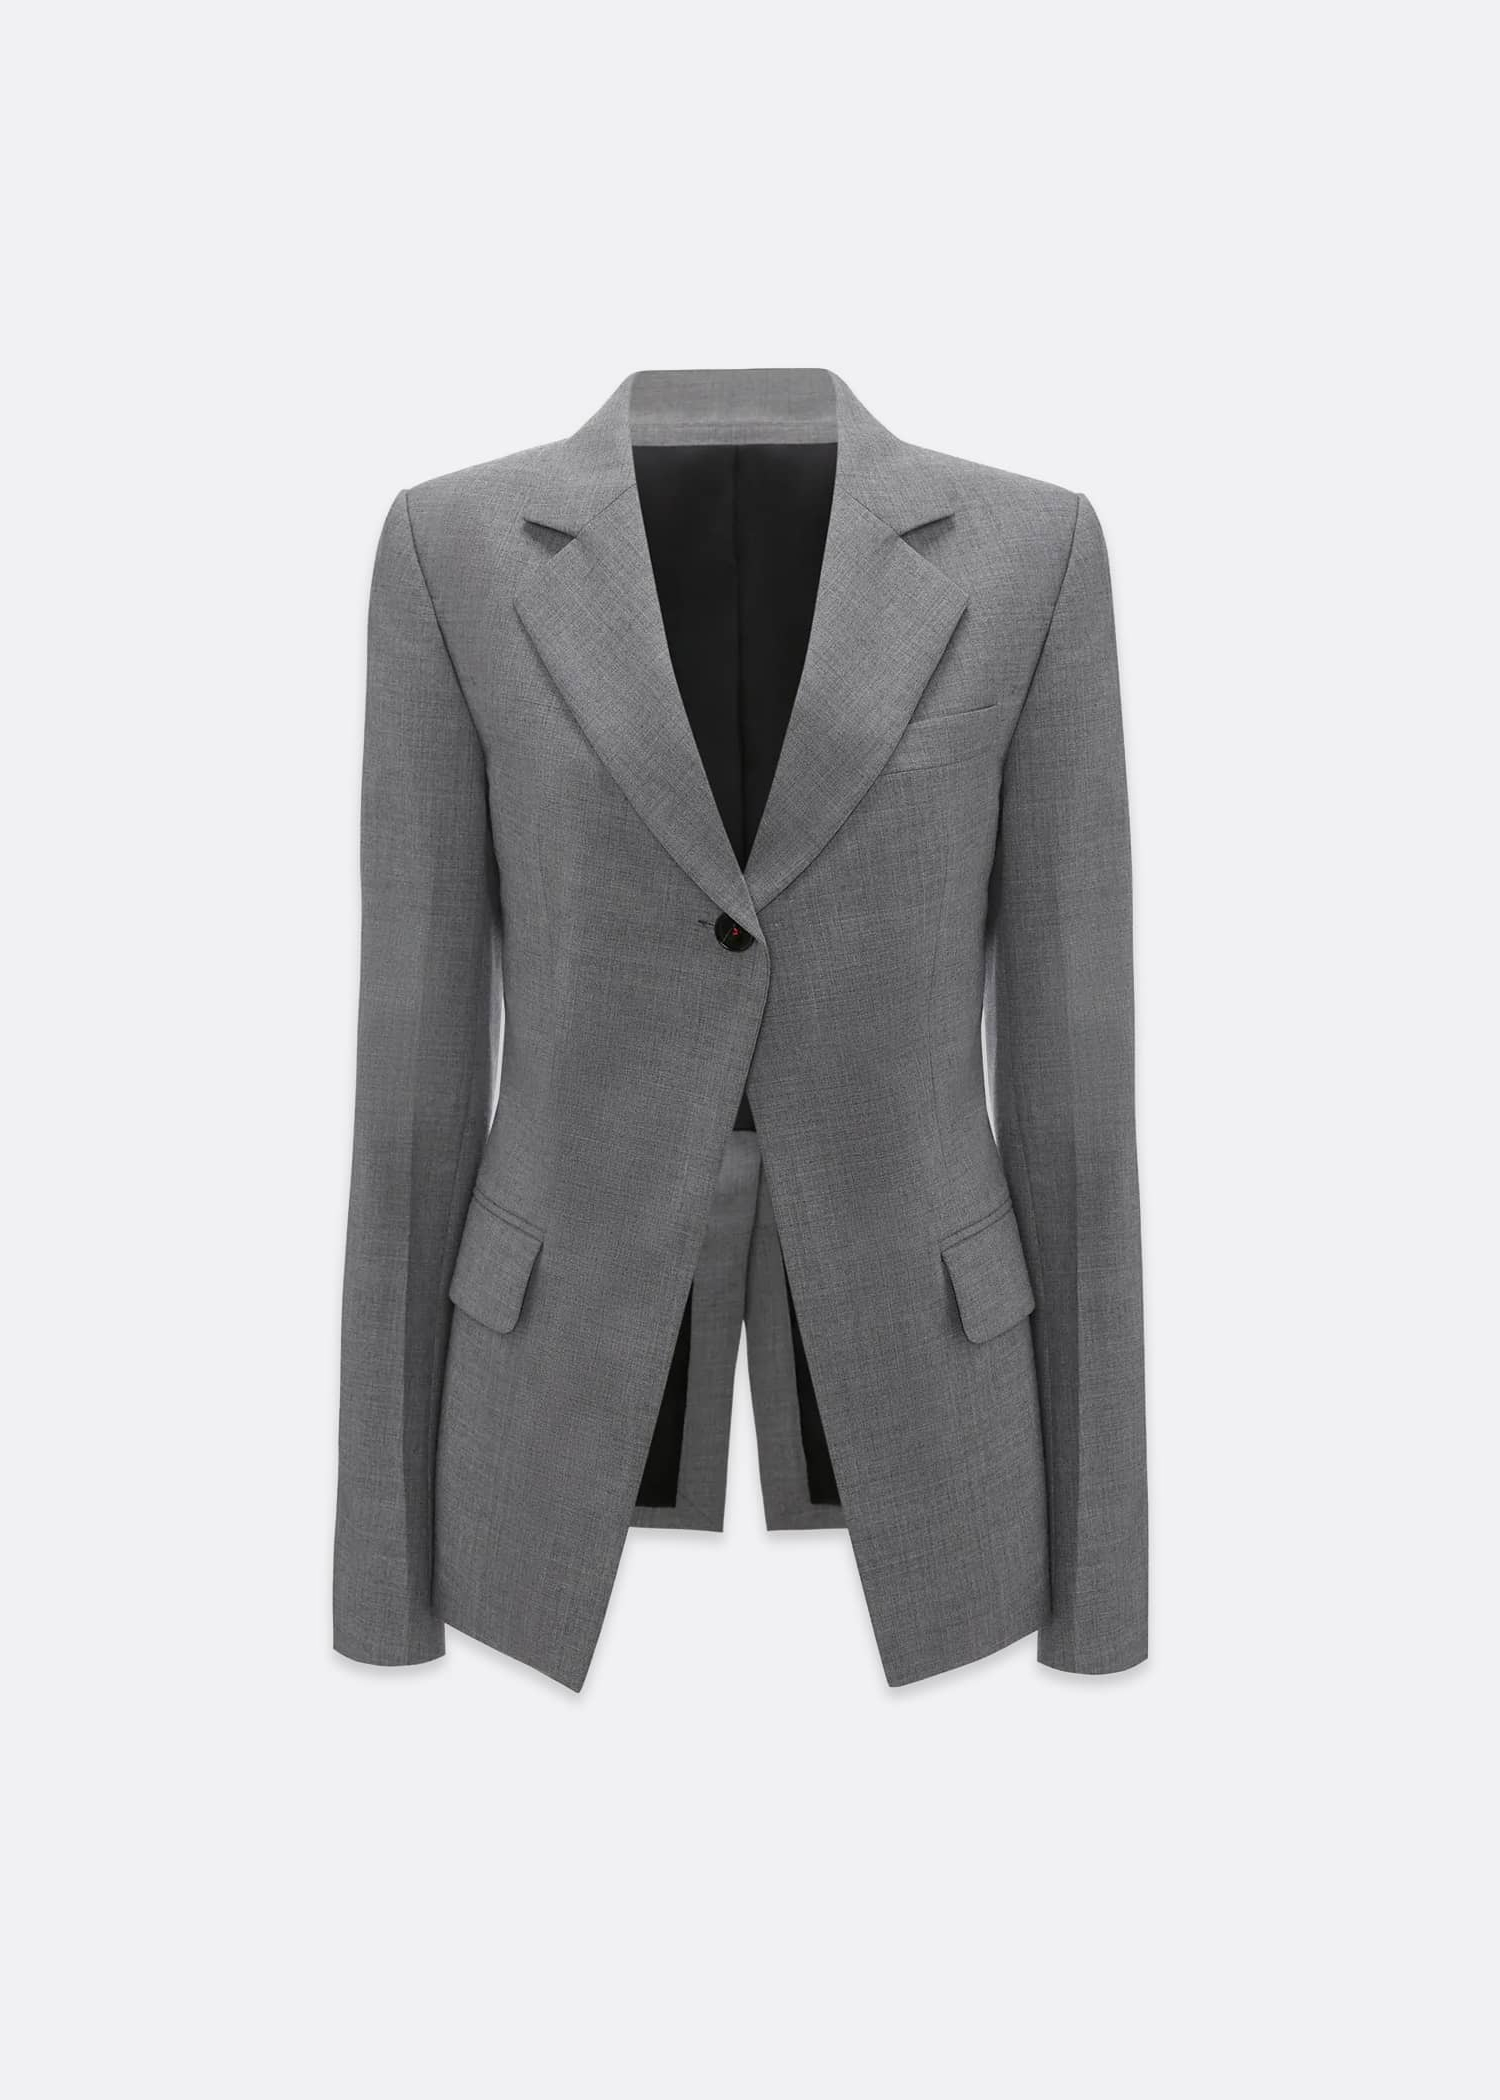 Victoria Beckham Open Front Single Breasted Jacket